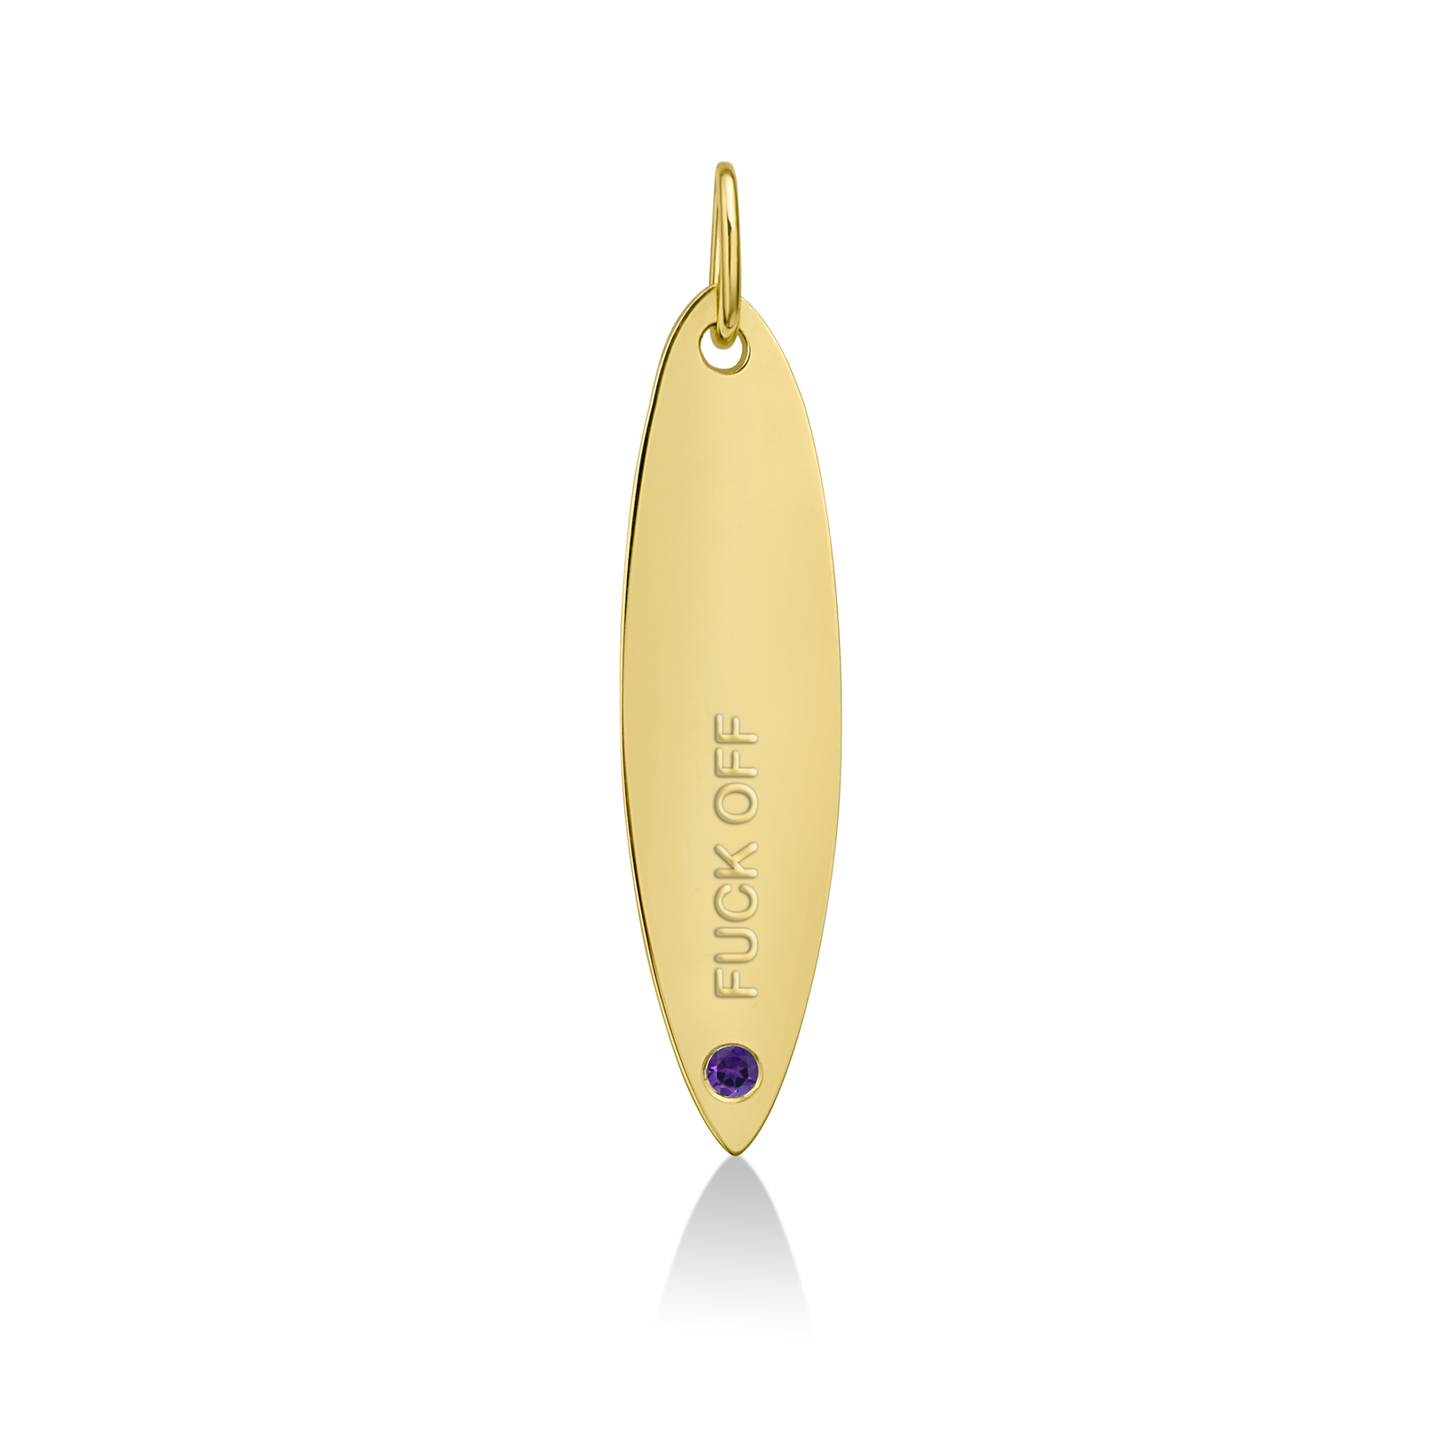 14k gold surfboard charm lock with FUCK OFF engraved and amethyst